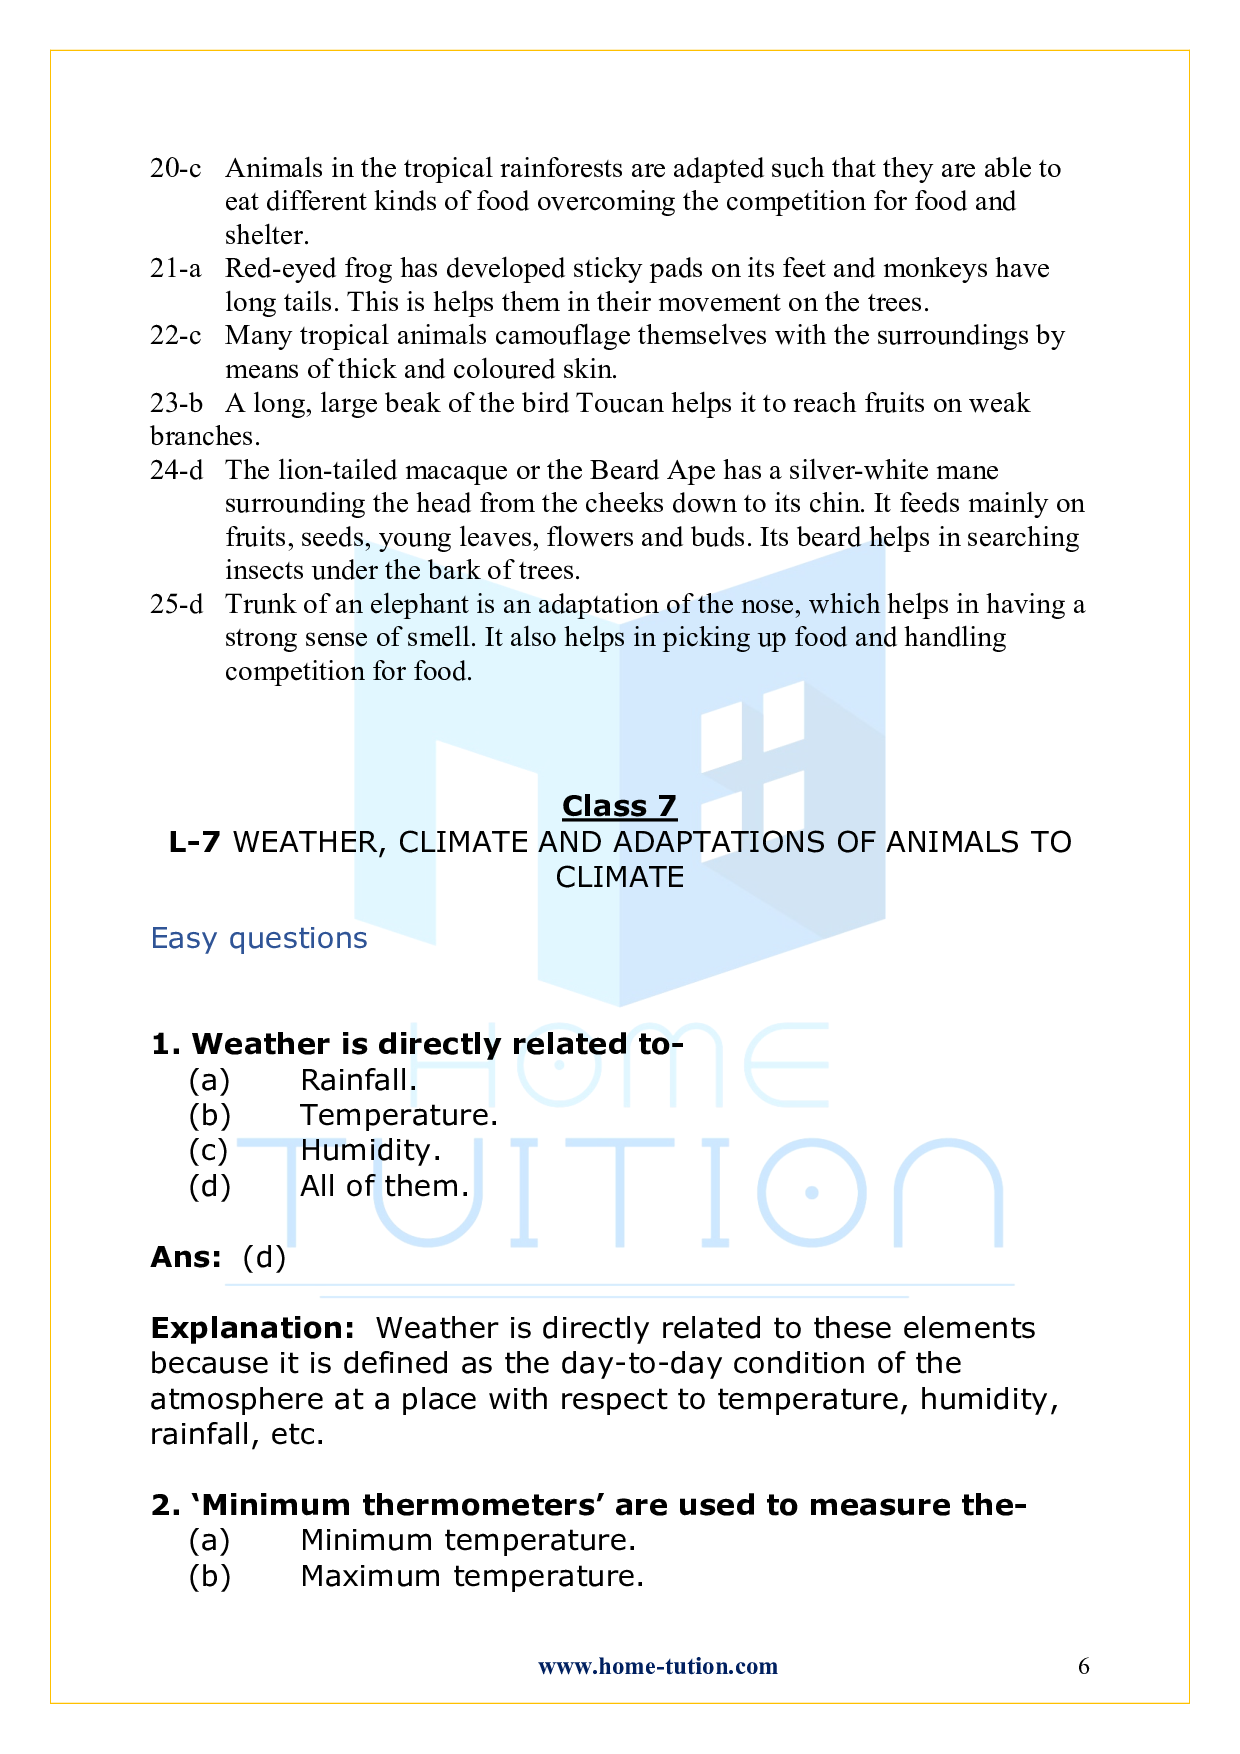 Chapter 7 Weather, Climate and Adaptations of Animals to Climate